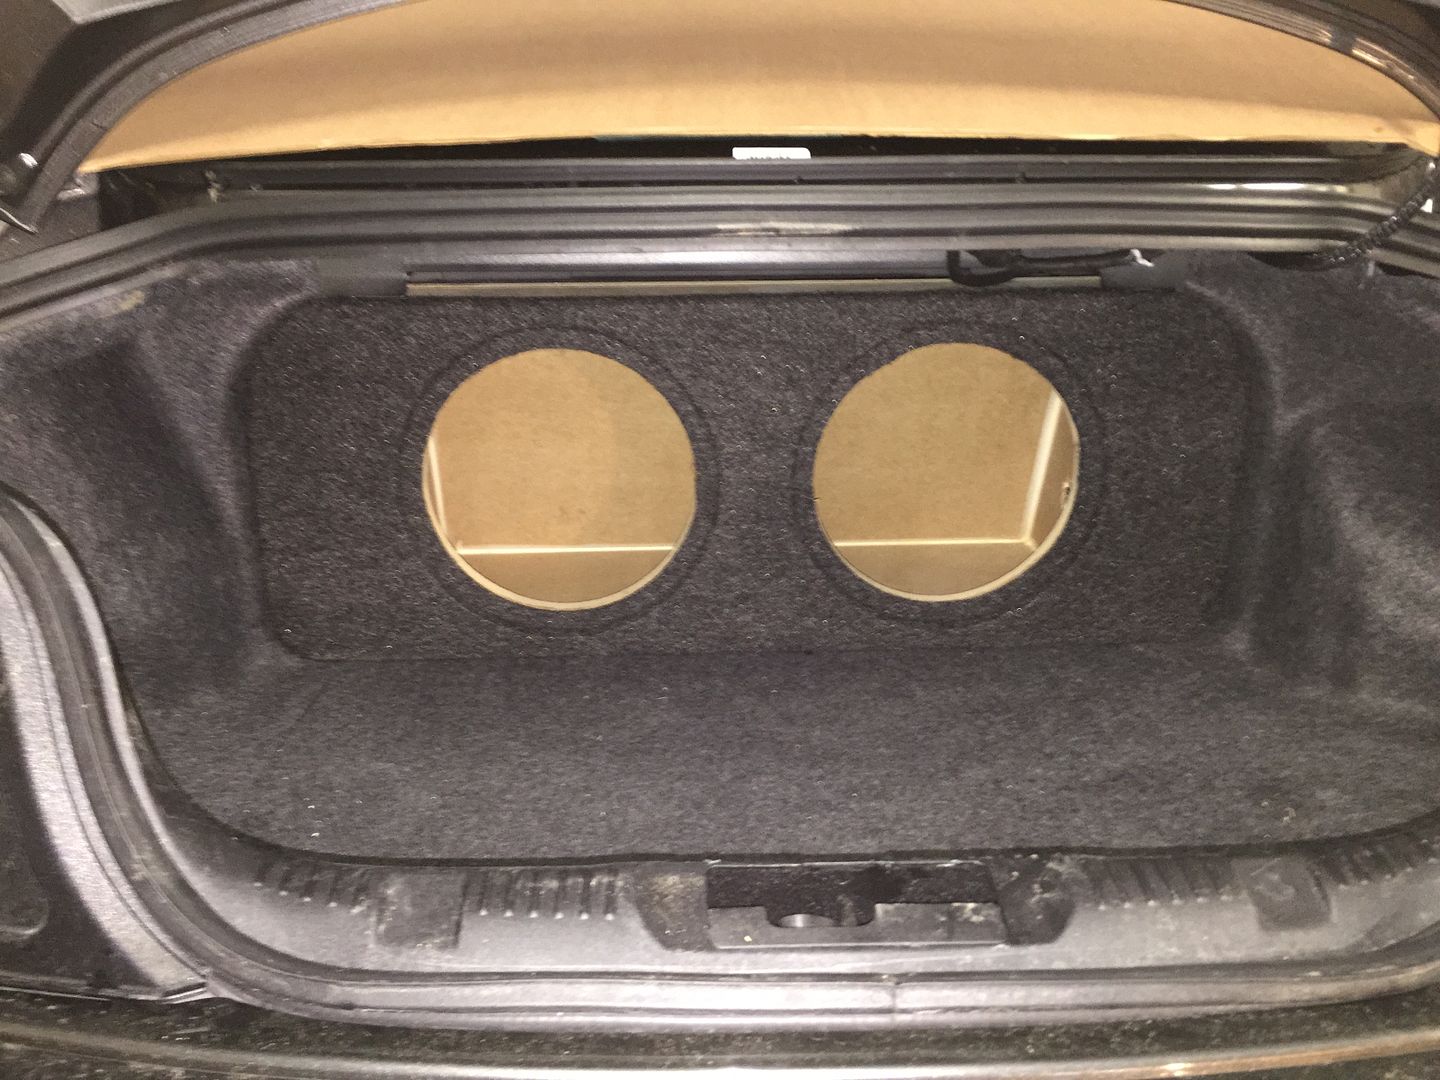 ZEnclosures Subwoofer Box for the Infiniti G35 Coupe 2-10" Sub Speaker Box New!